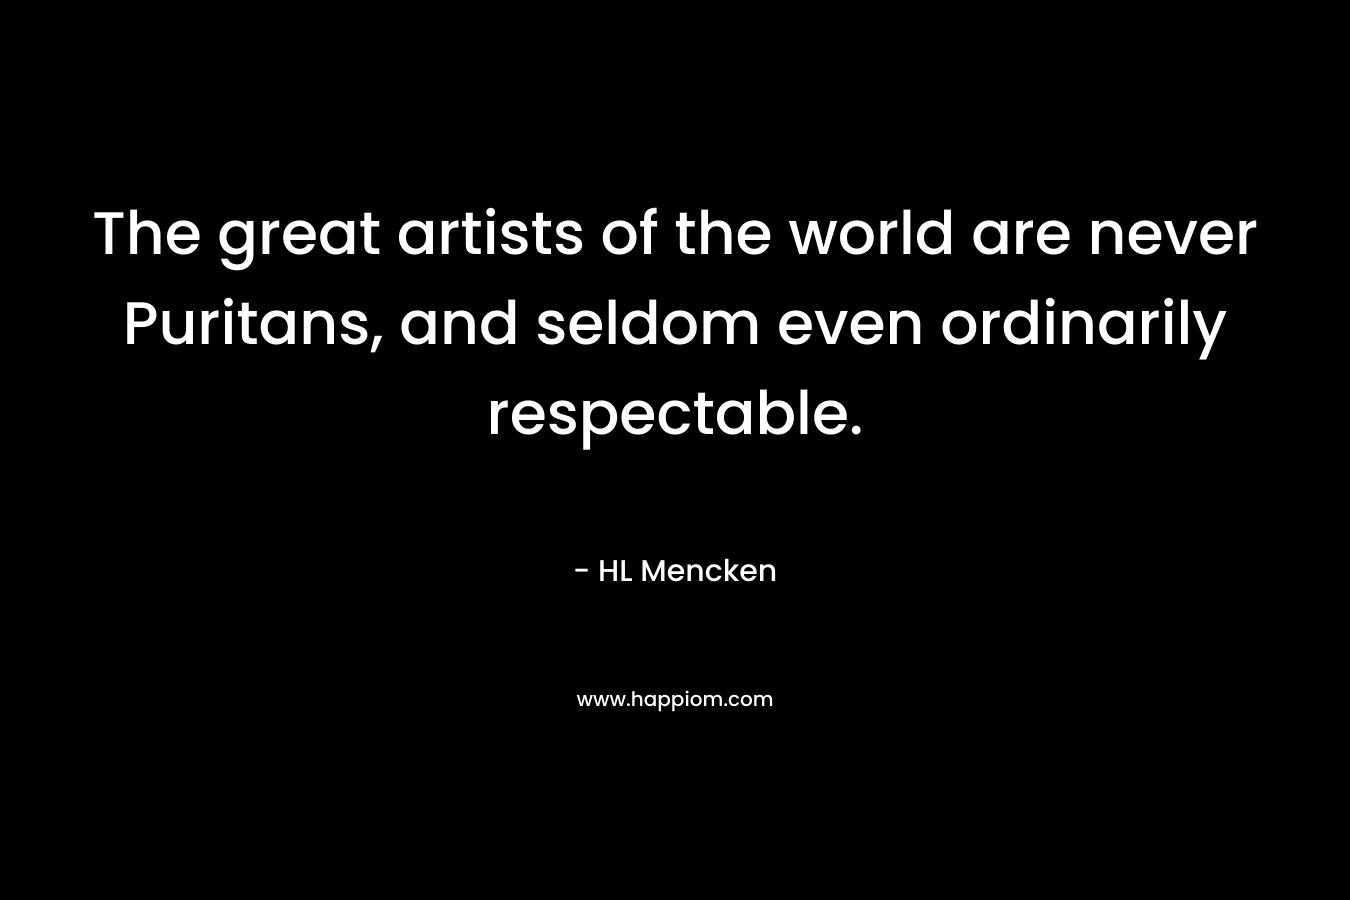 The great artists of the world are never Puritans, and seldom even ordinarily respectable.